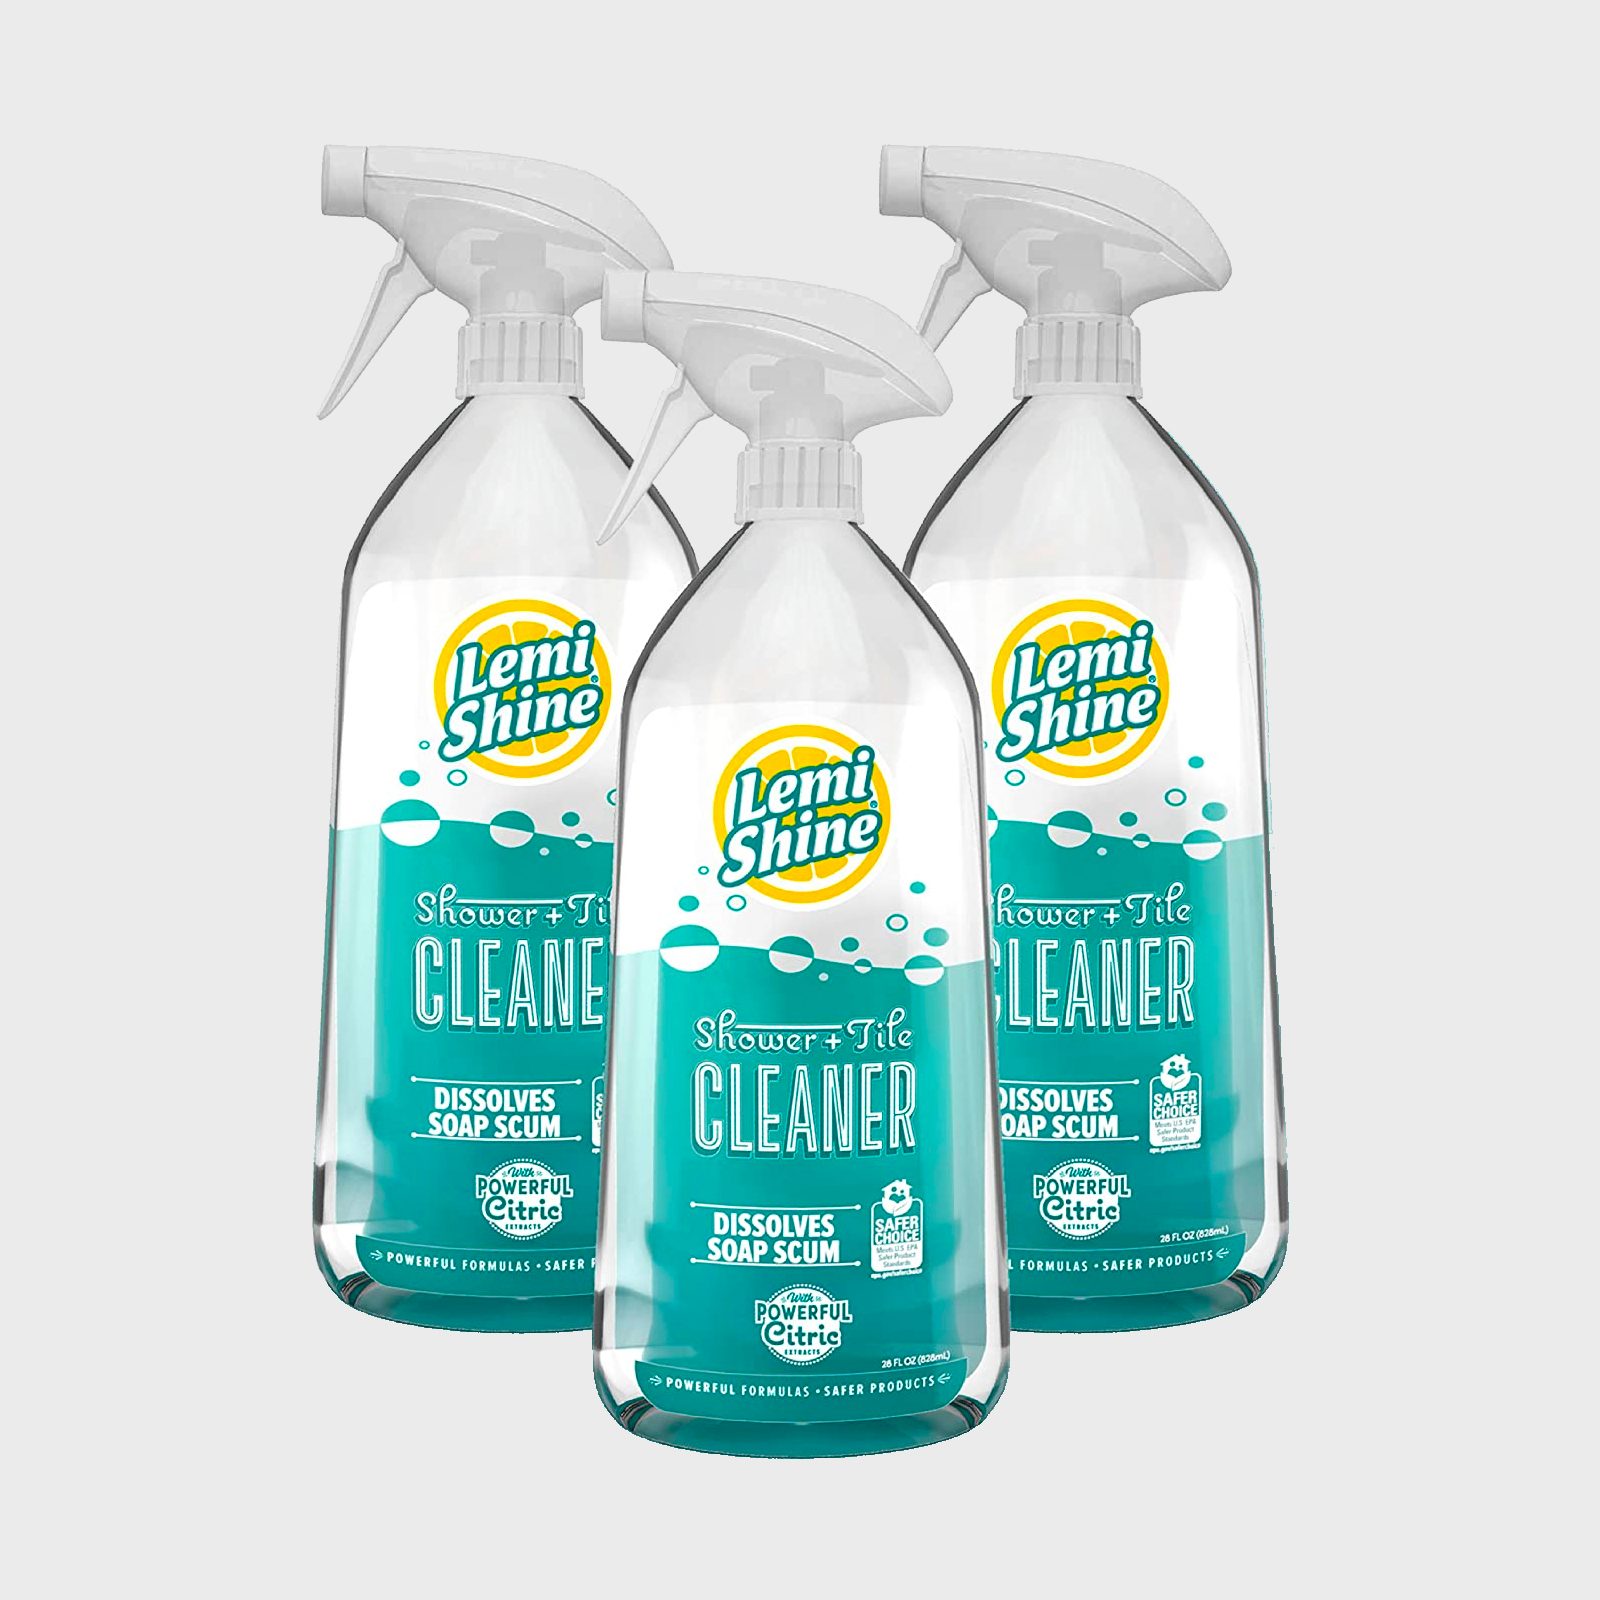 Protect Your Health and Home with Eco-Friendly Home Cleaning Products